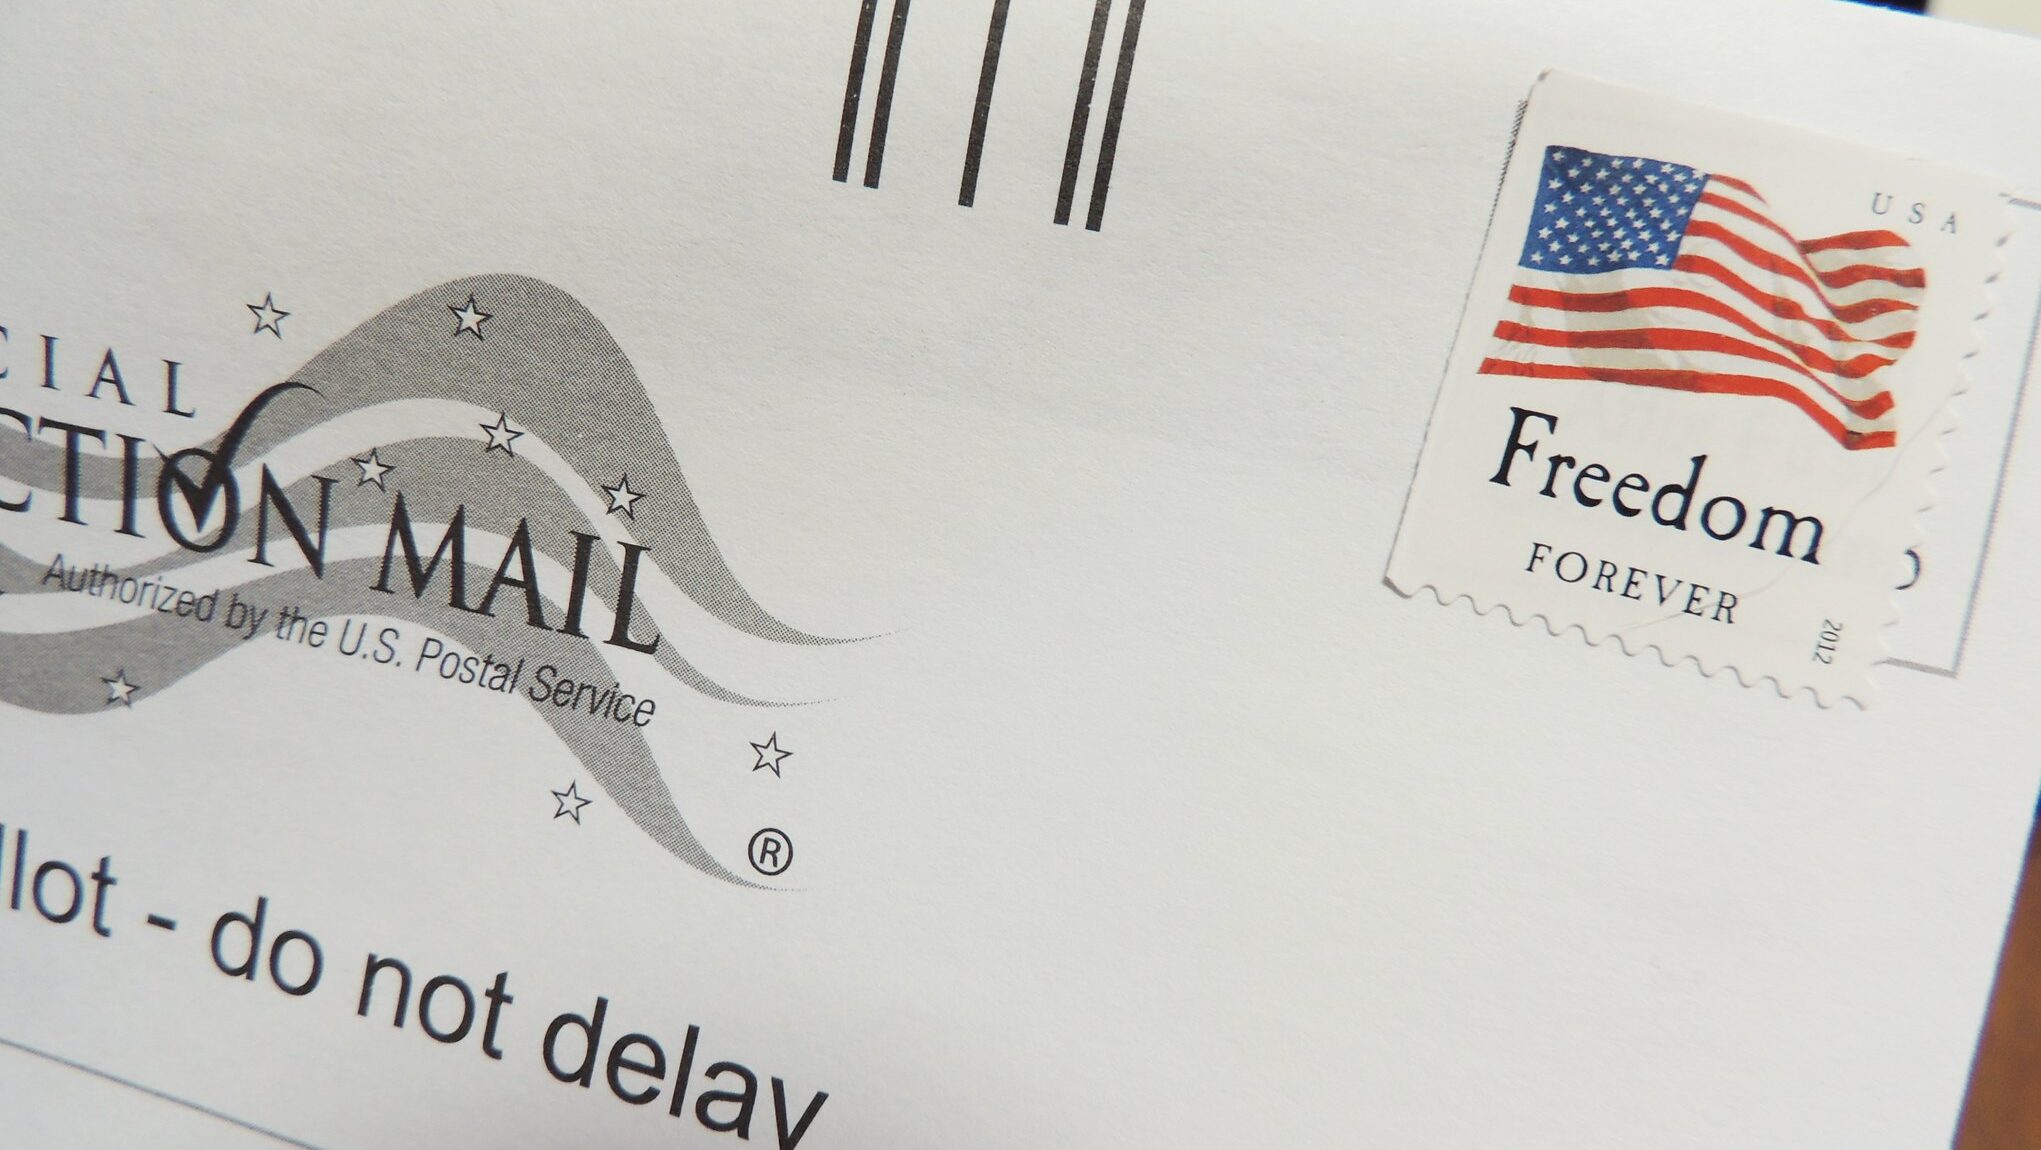 Pennsylvania Law Banning Undated Mail Ballots Upheld by Appeals Court